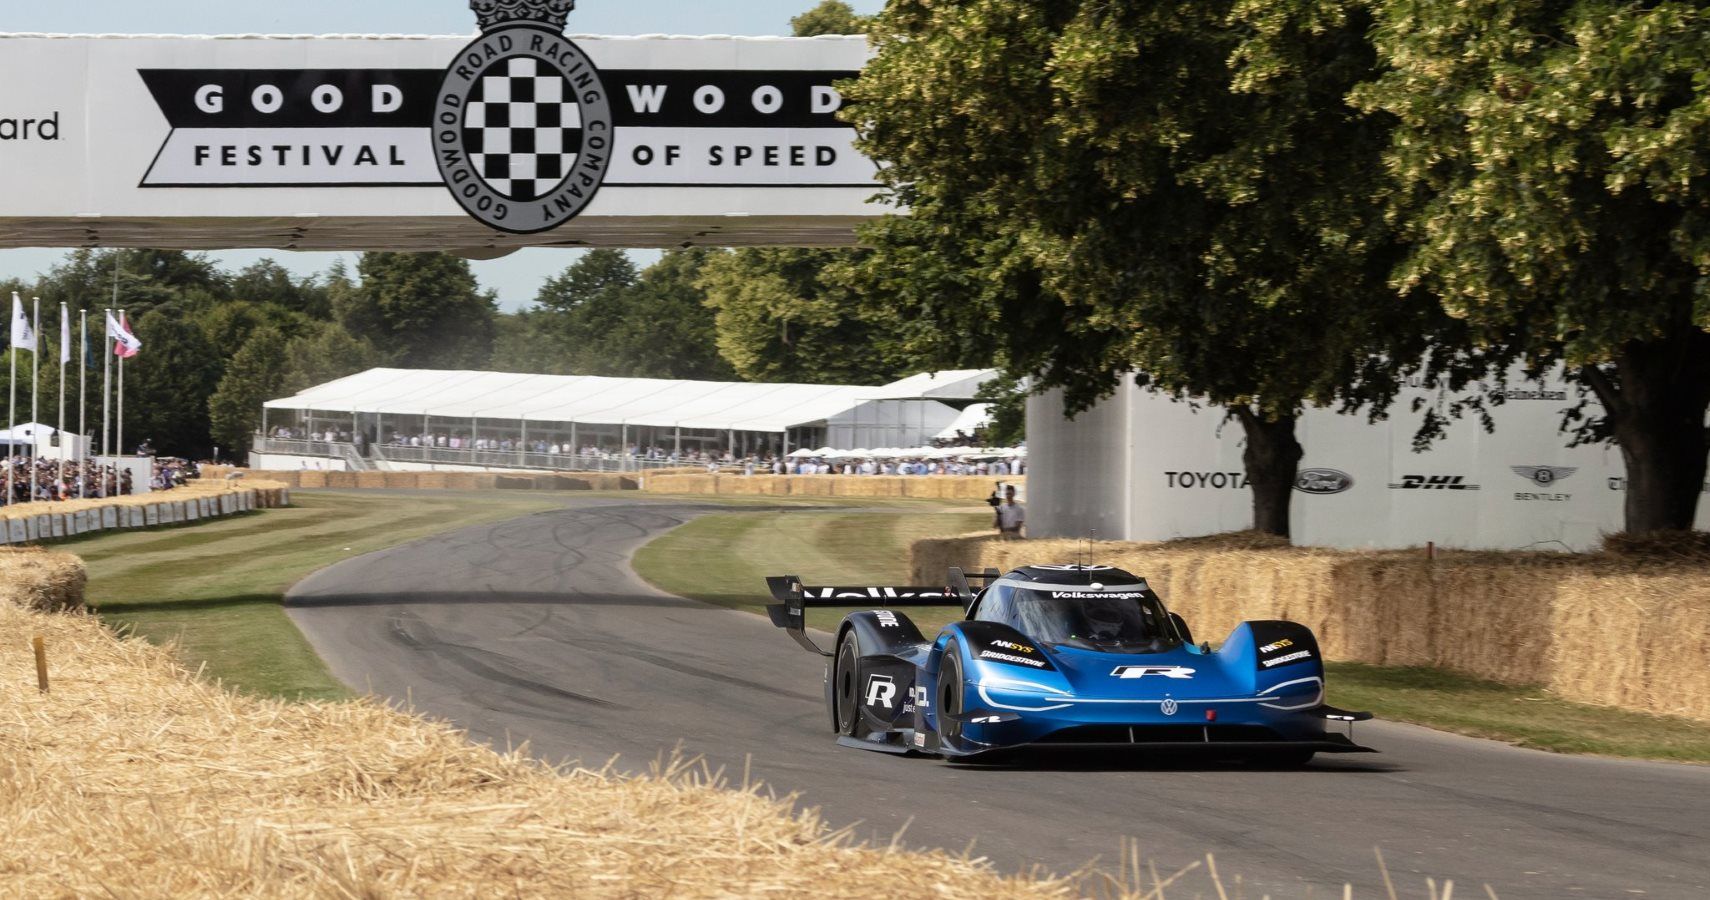 Volkswagen I.D. R The New King Of Goodwood After Shattering 20-Year-Old Record